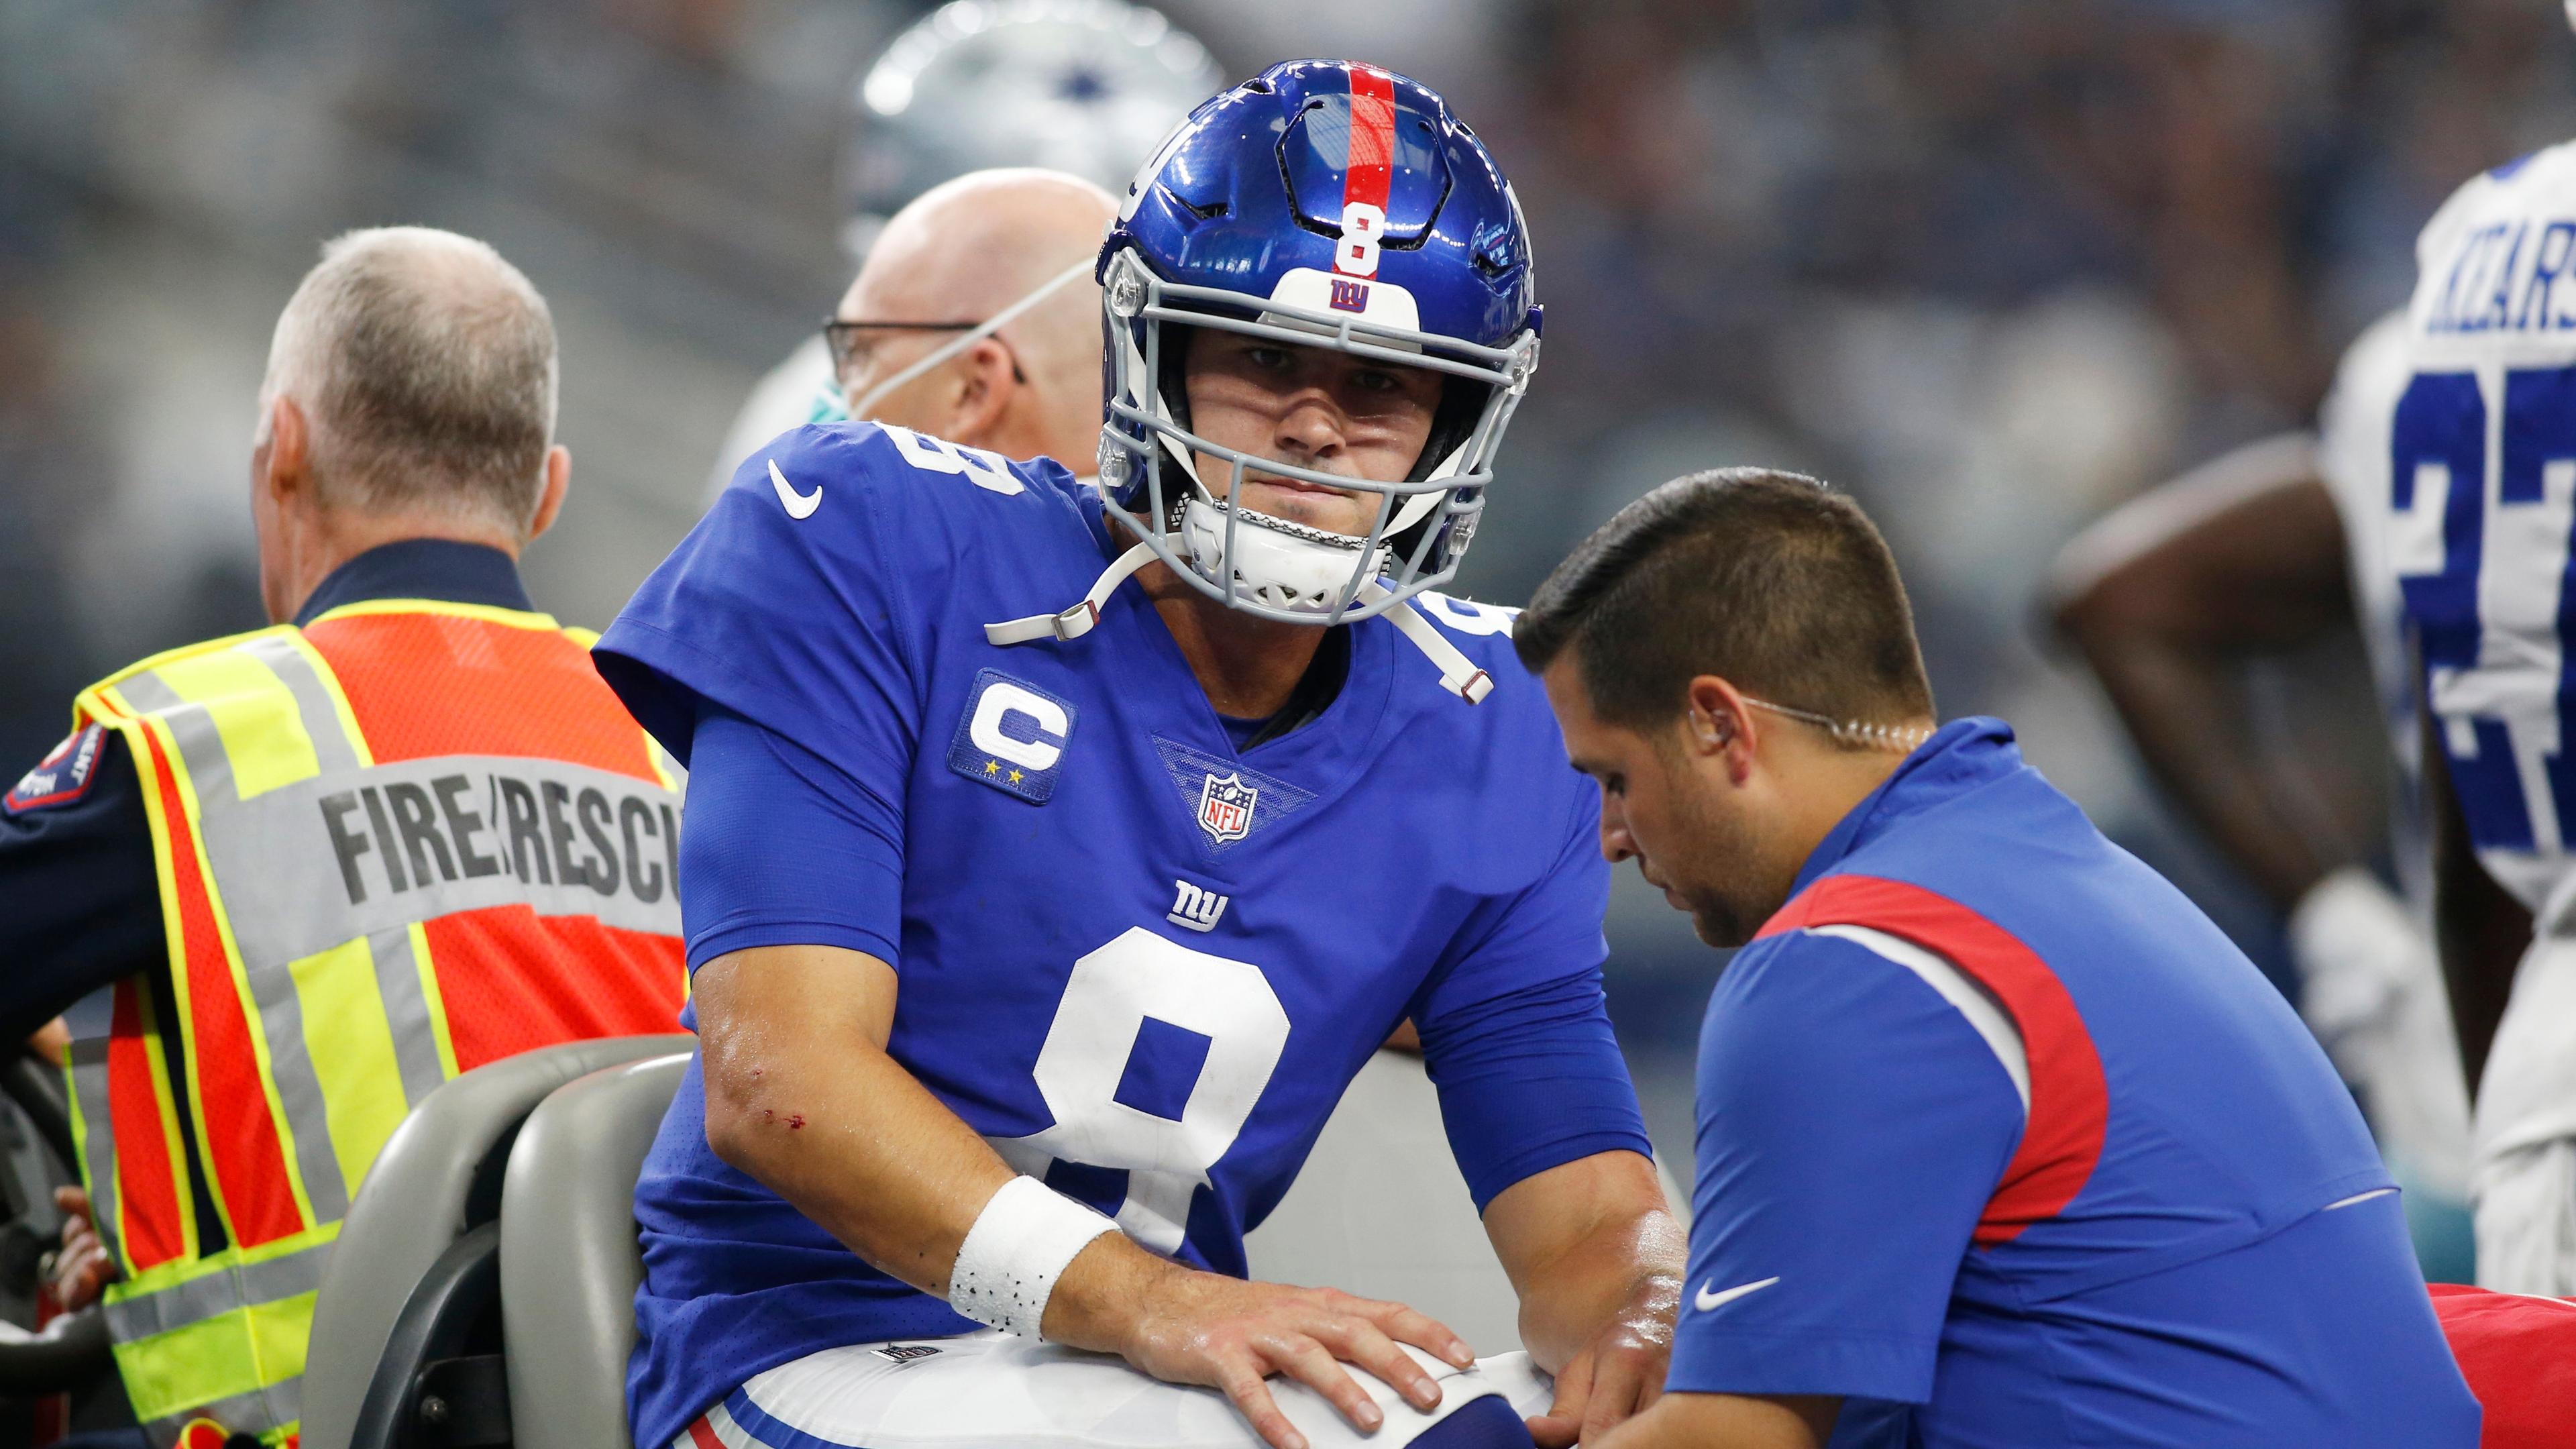 New York Giants quarterback Daniel Jones (8) leaves the field on a cart with an injury in the second quarter against the Dallas Cowboys at AT&T Stadium. / Tim Heitman-USA TODAY Sports